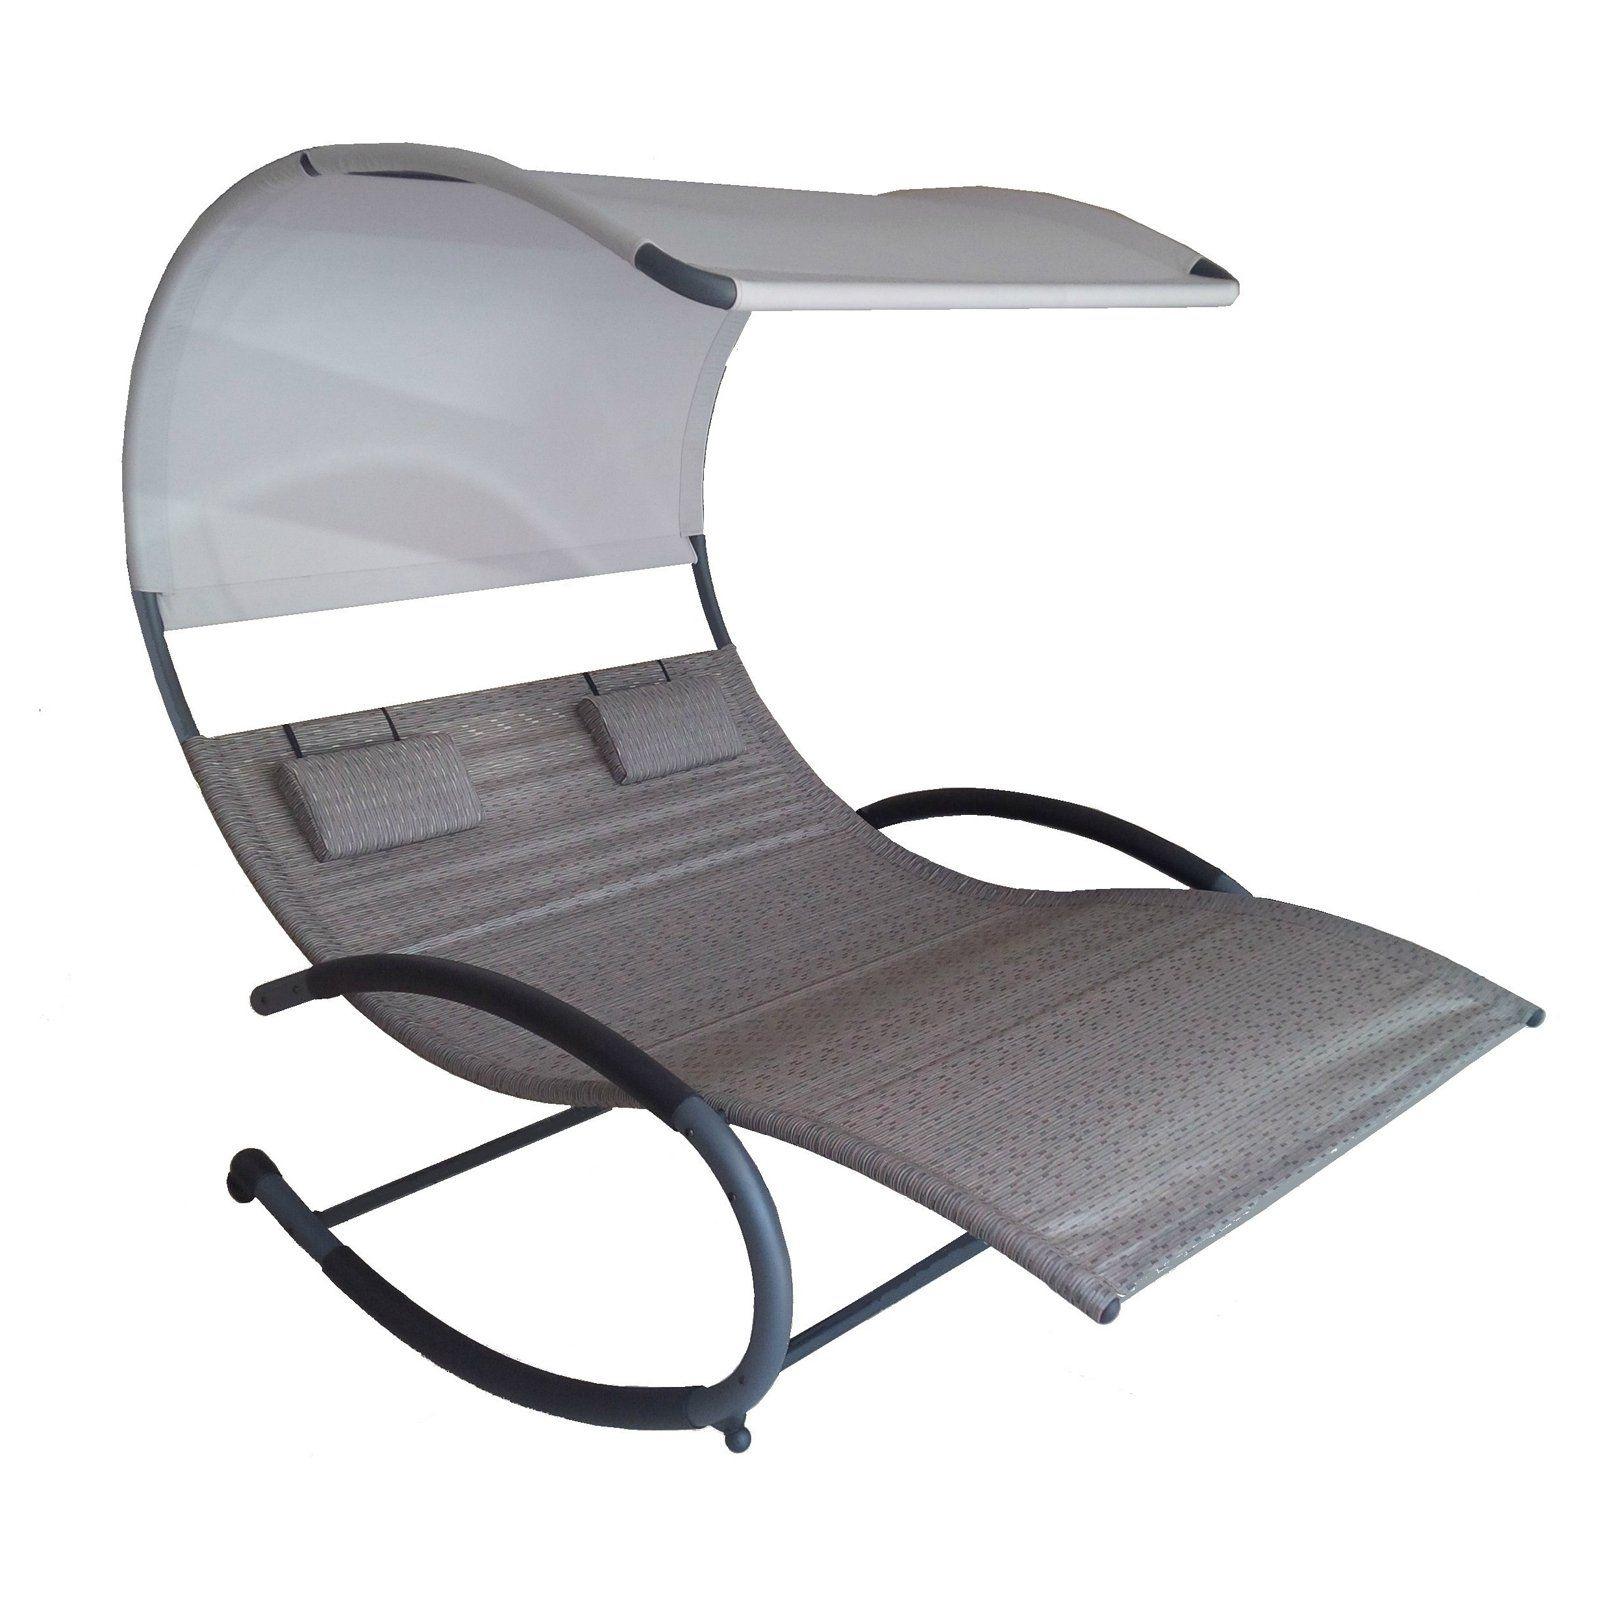 Outdoor Vivere Double Chaise Lounge Rocker With Canopy in sizing 1600 X 1600